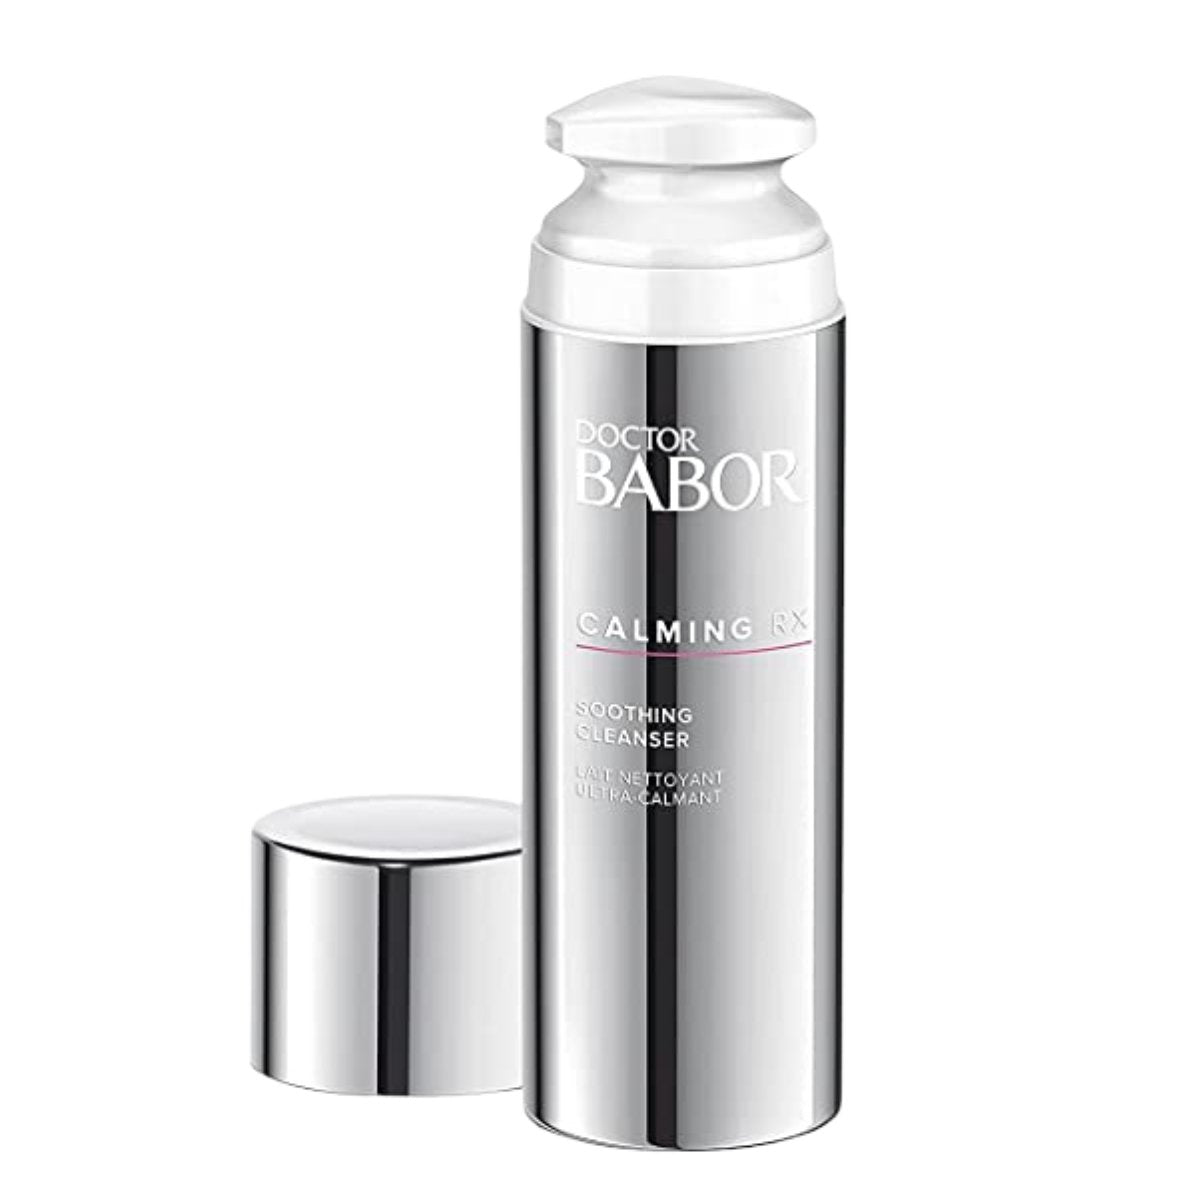 Babor - Calming RX Soothing Cleanser 150ml - SkincareEssentials